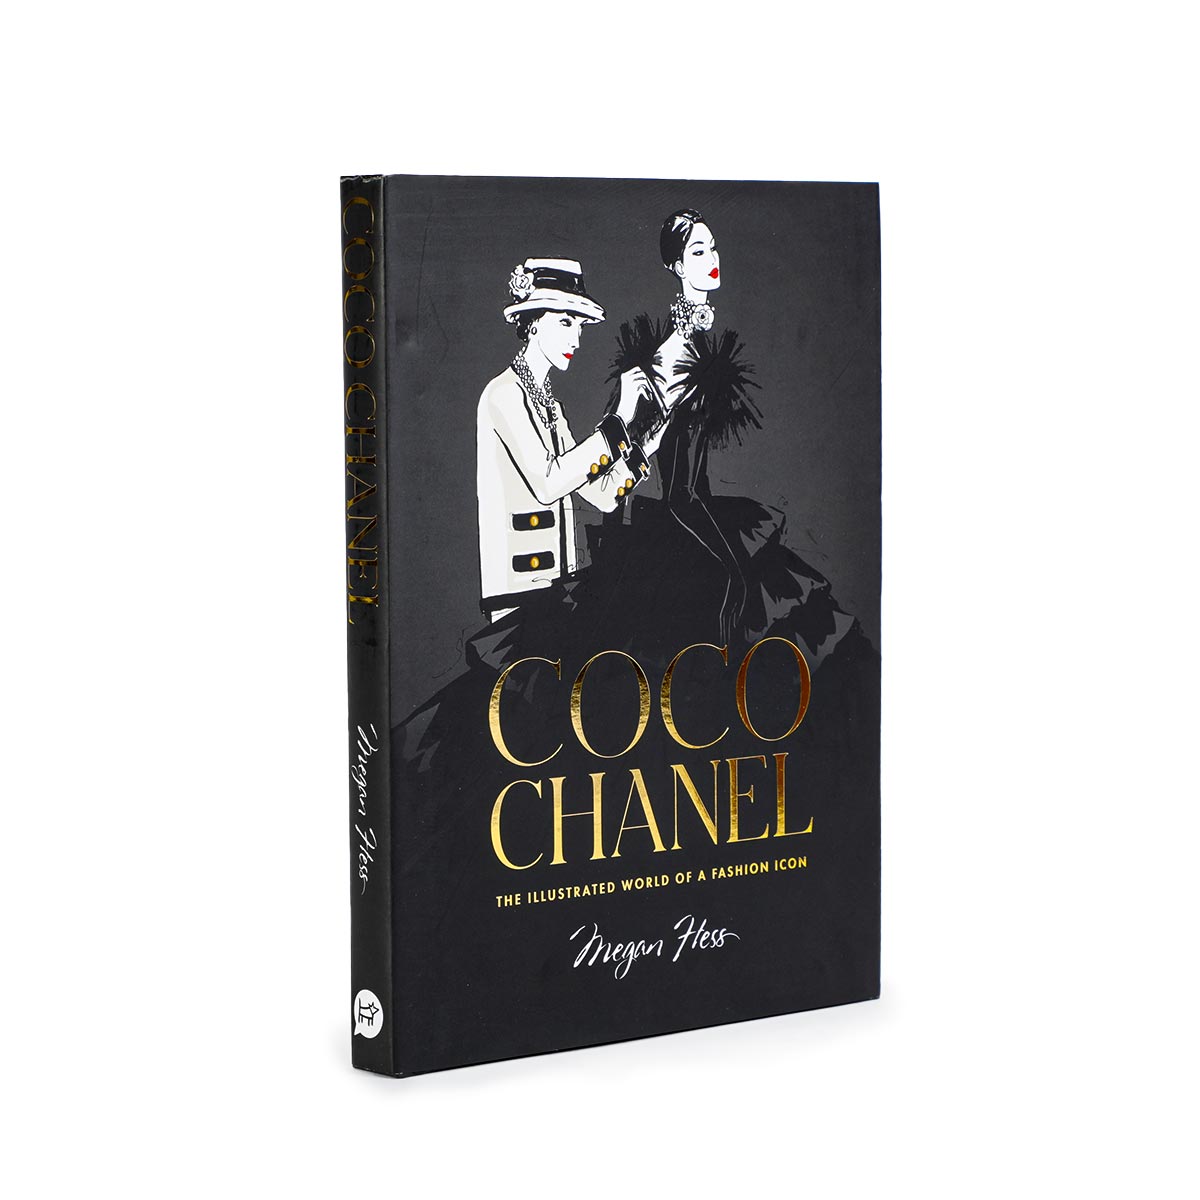 Coco Chanel: the illustrated world of a fashion icon by Megan Hess